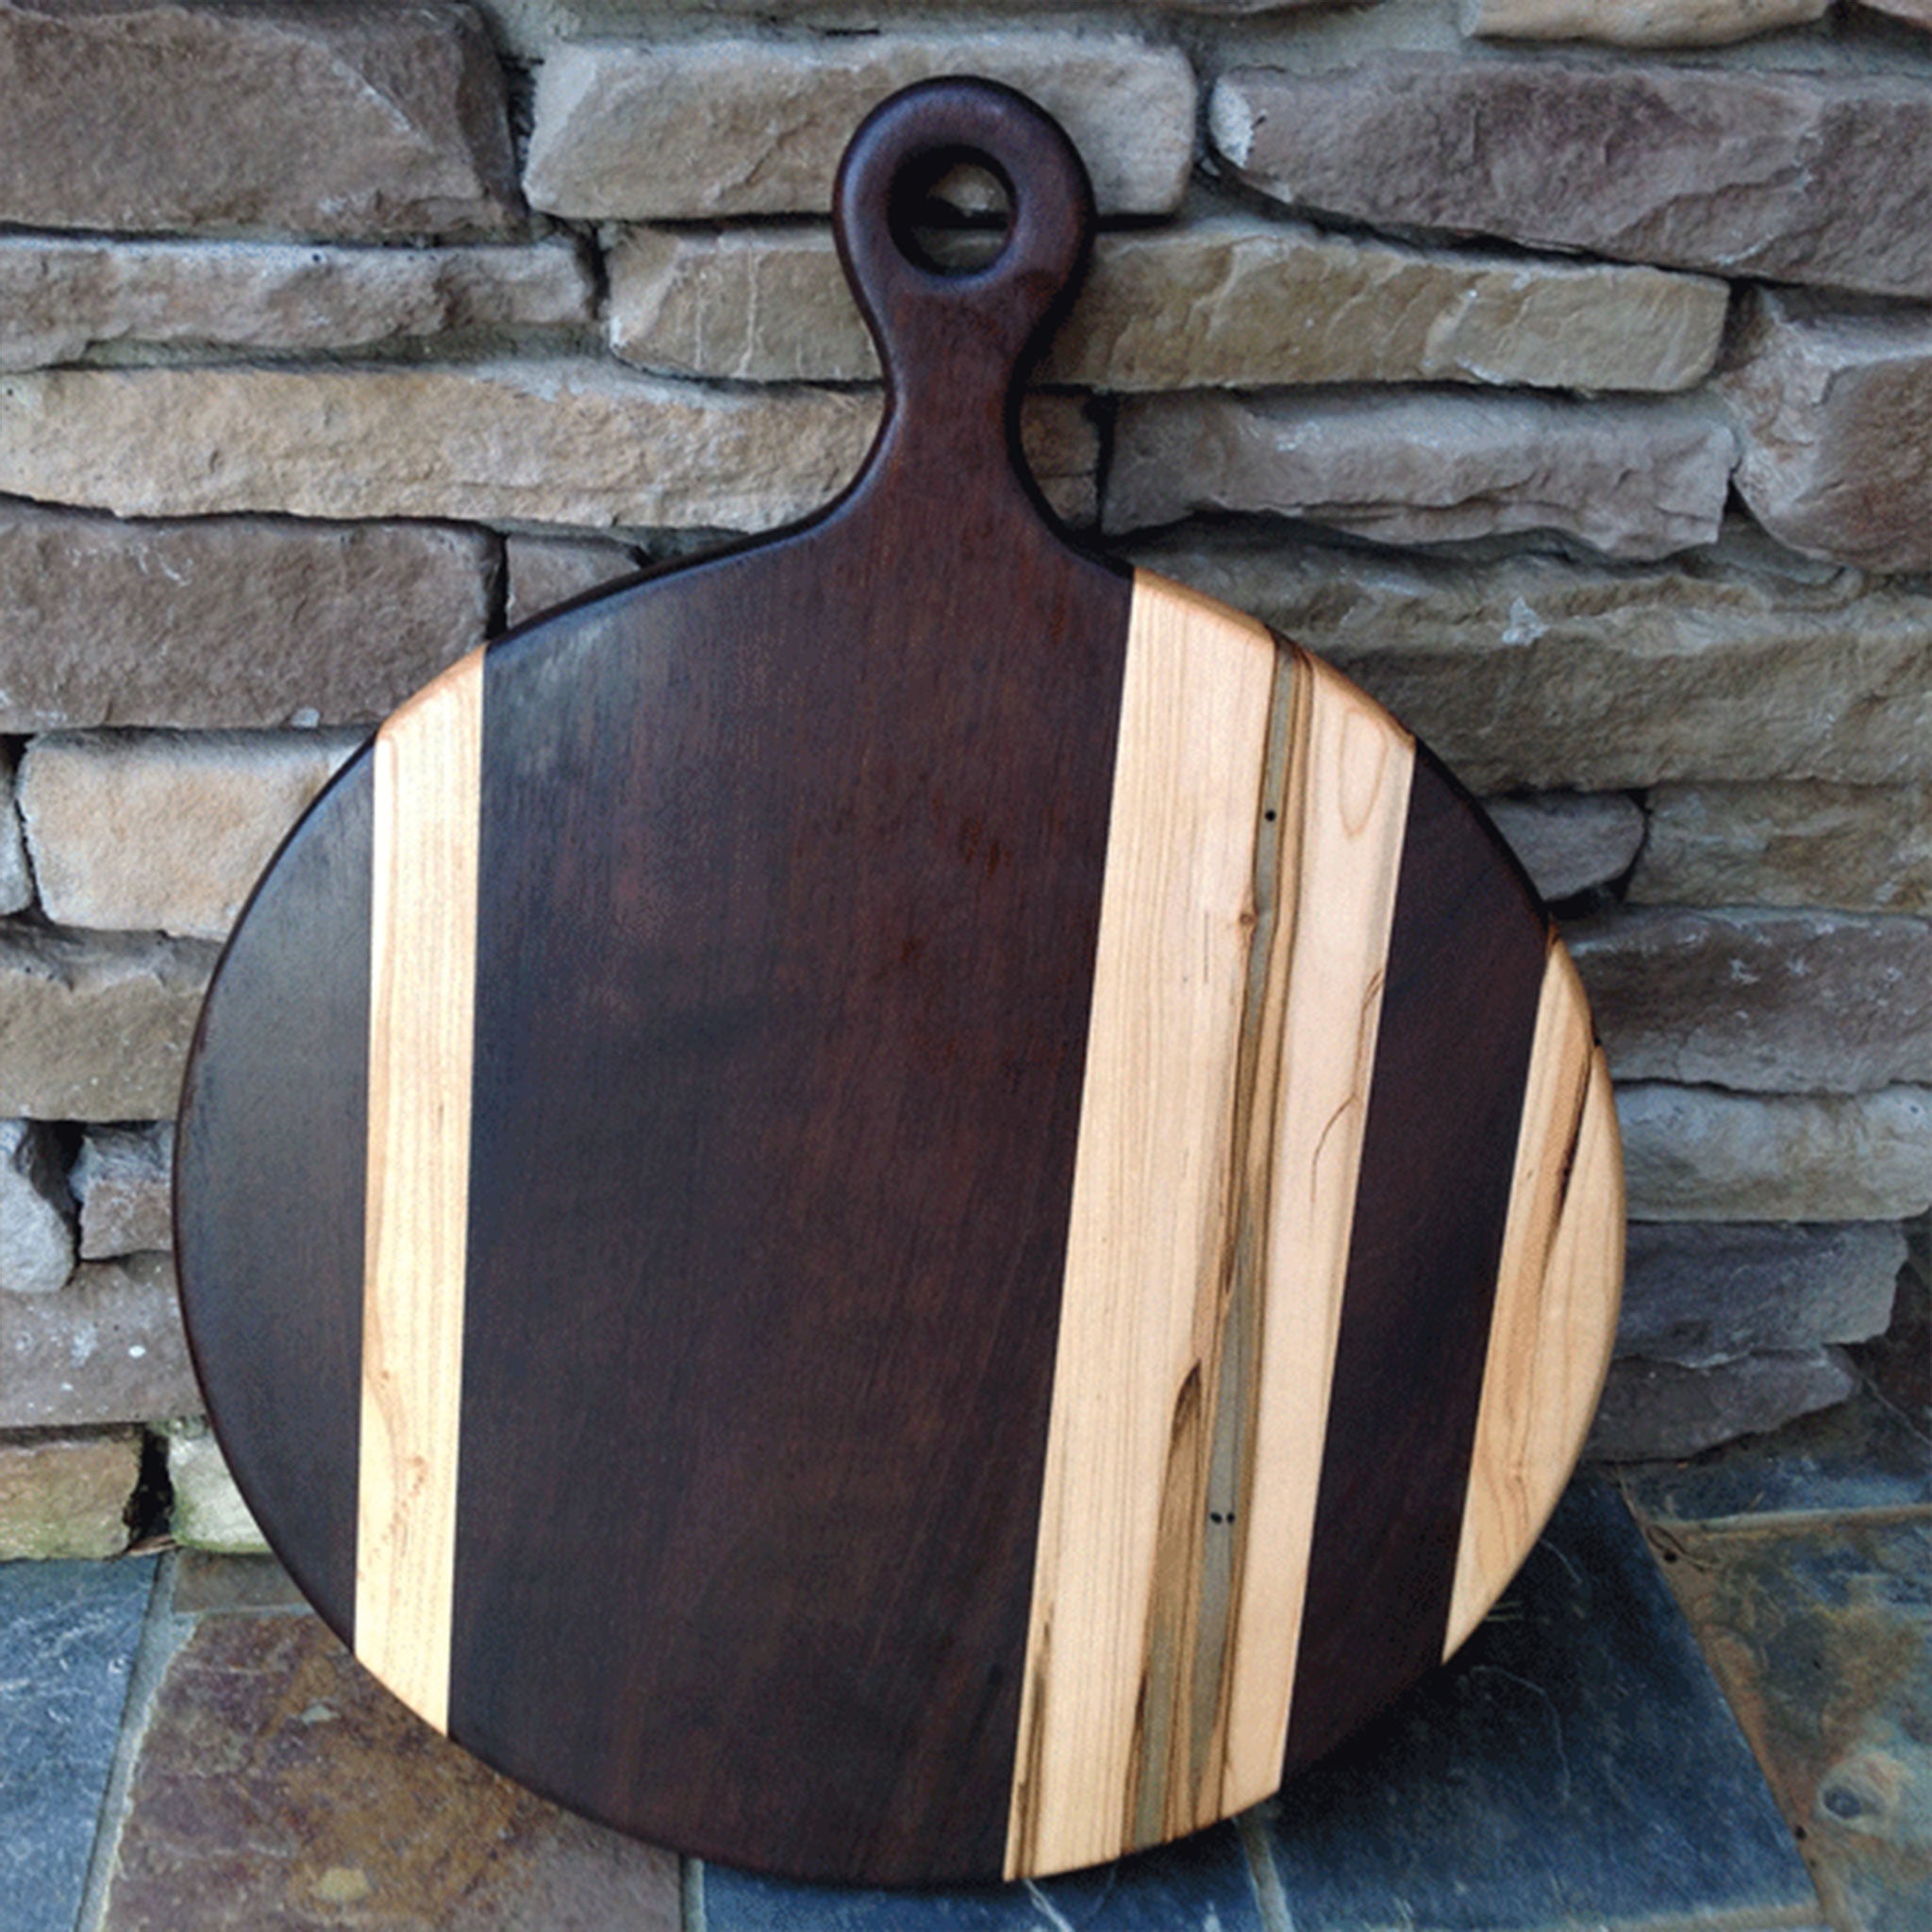 Handmade Wood Cutting Boards Including Oil (12 x 14)